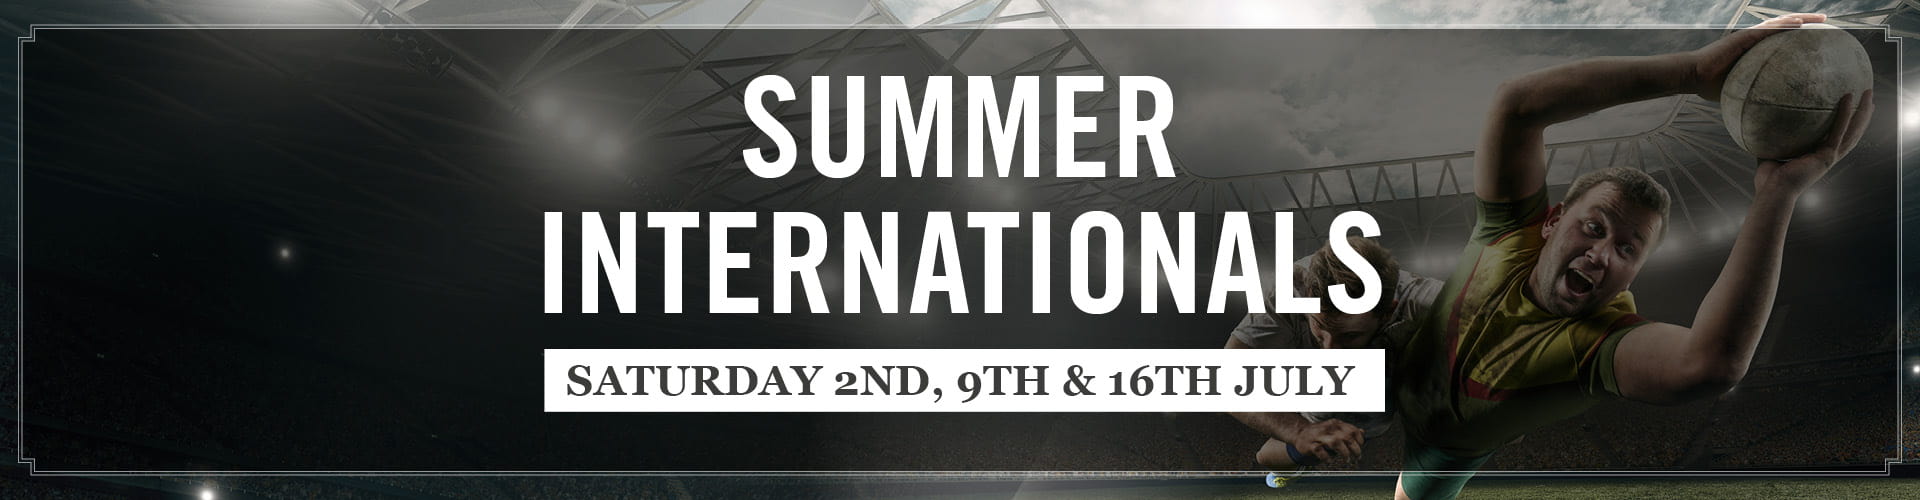 Watch Rugby Summer Internationals live at The Pembroke pub in London